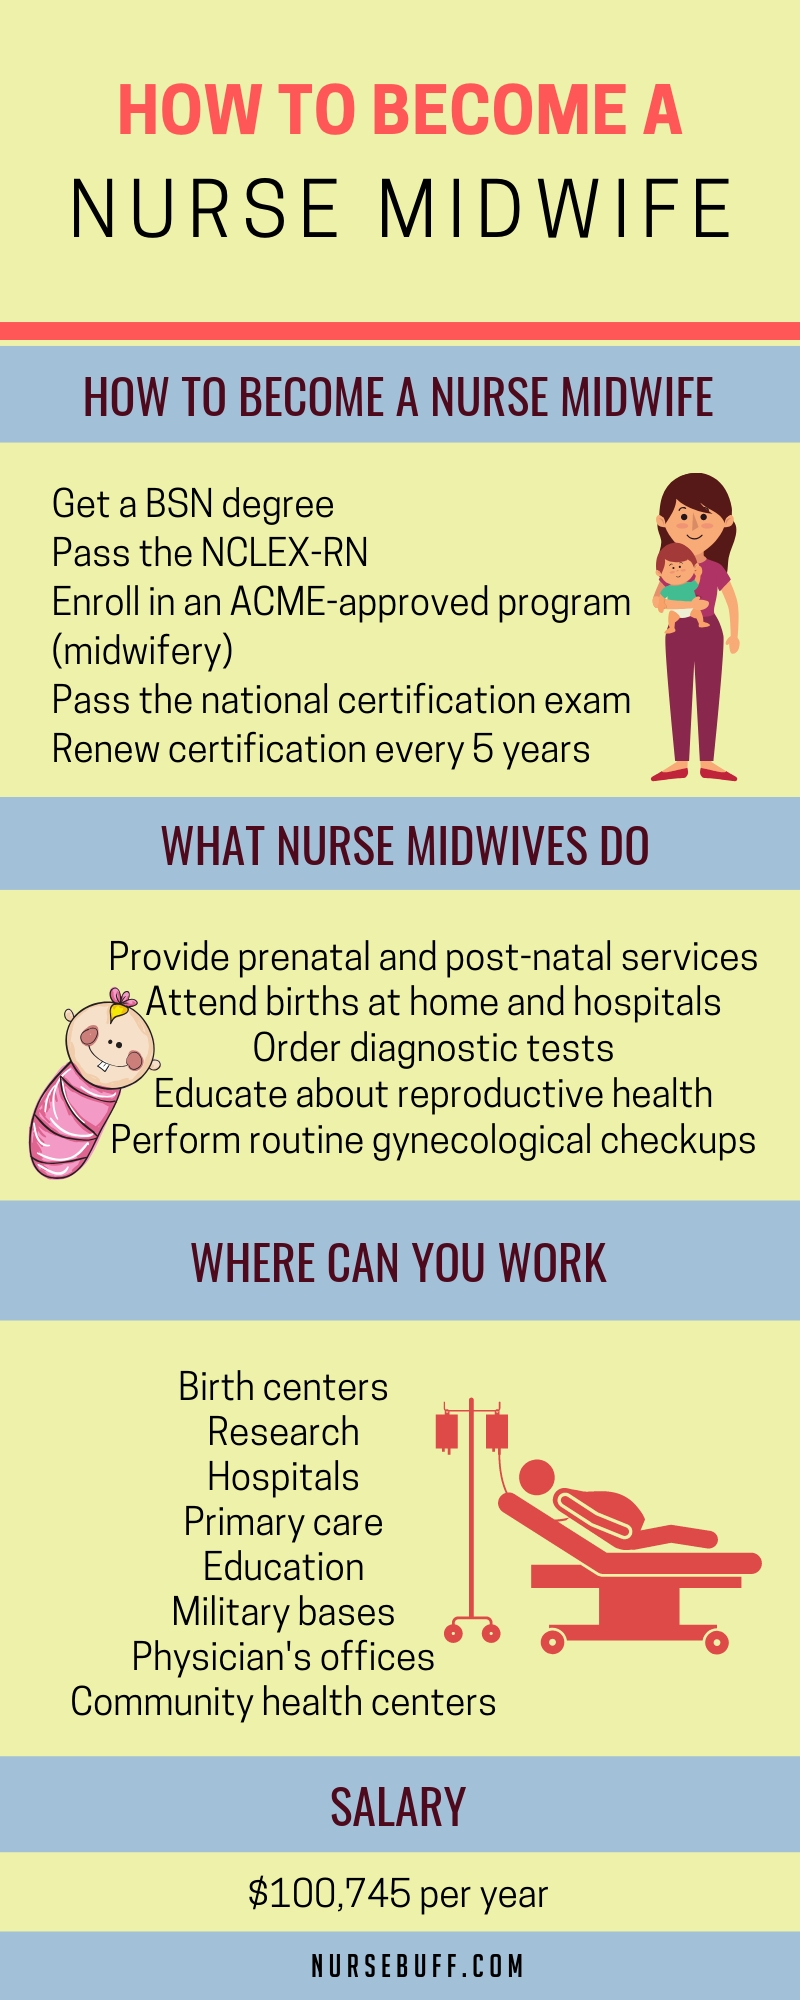 how to become a nurse midwife infographic